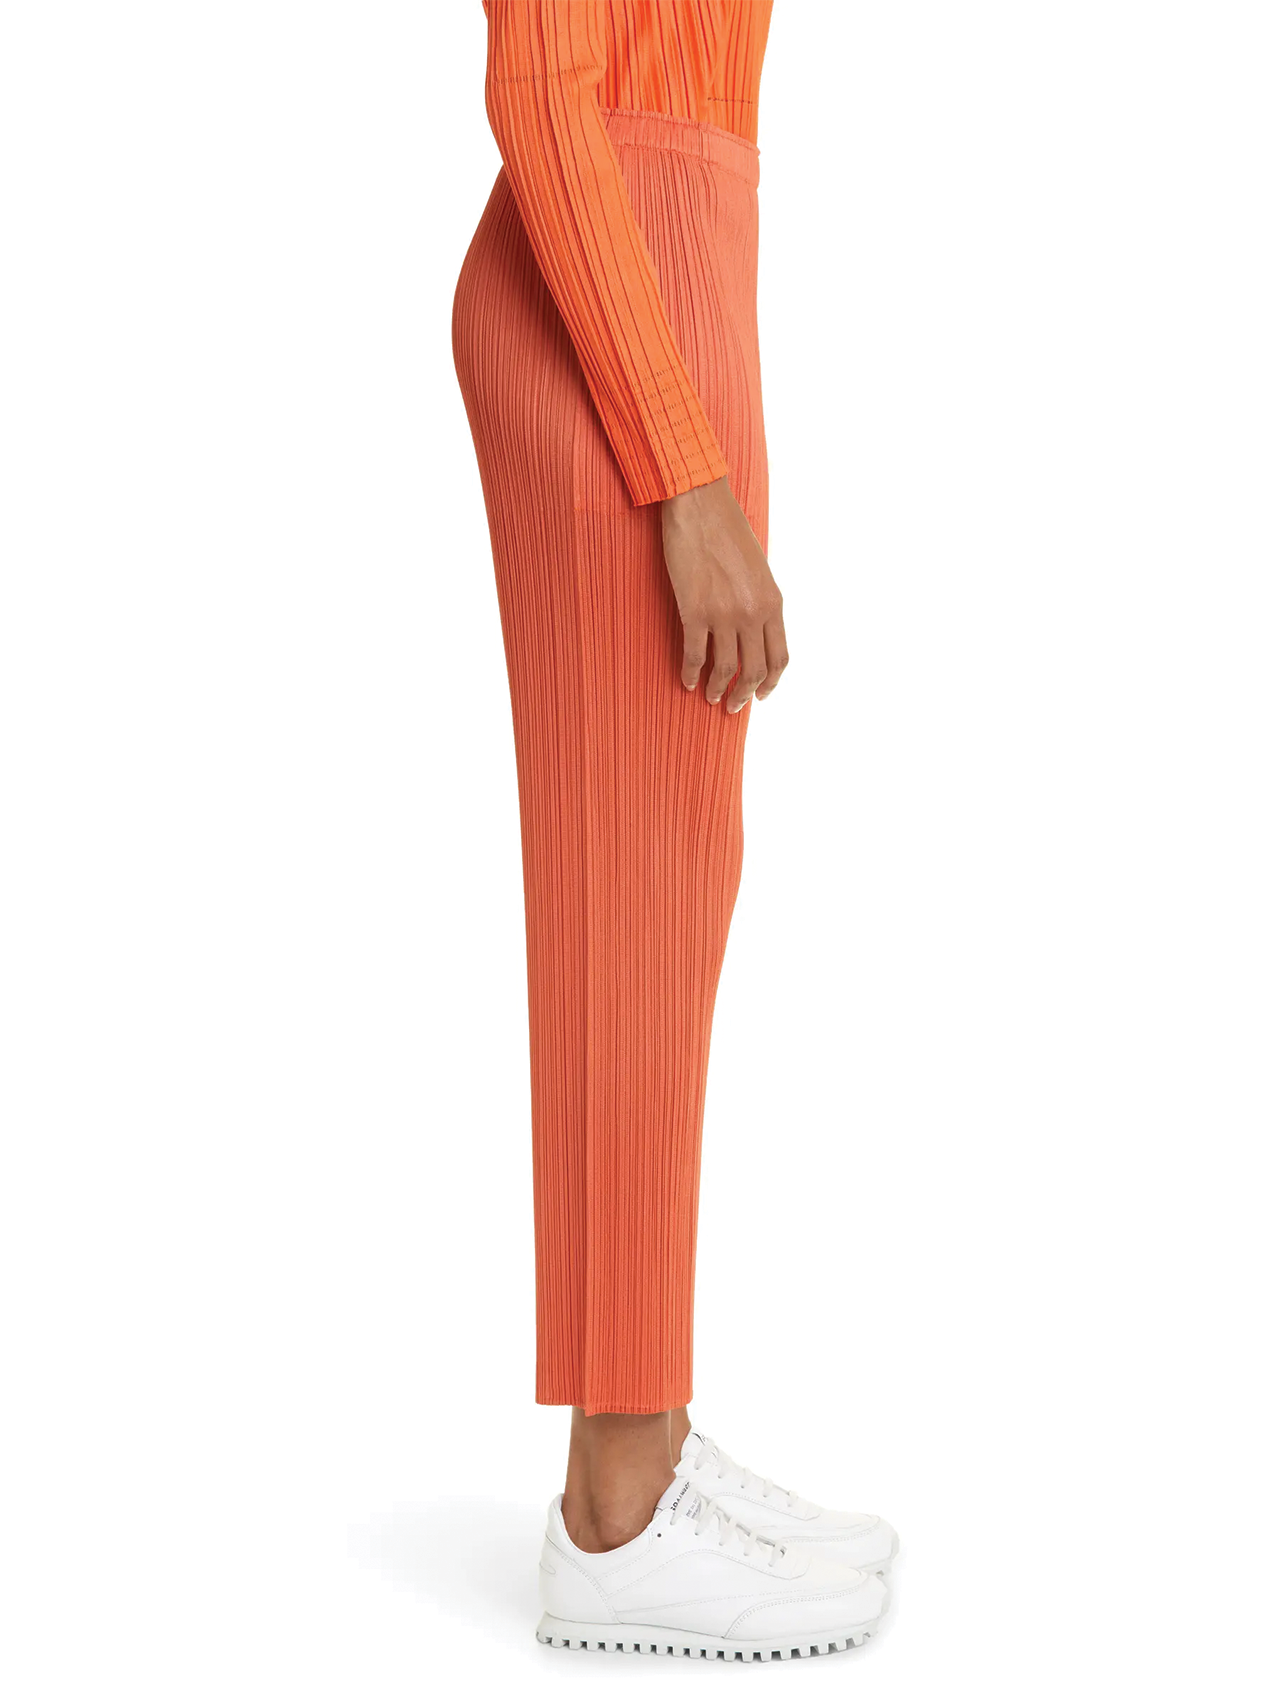 Please Please Issey Miyake Orange Red Monthly Colour Pants